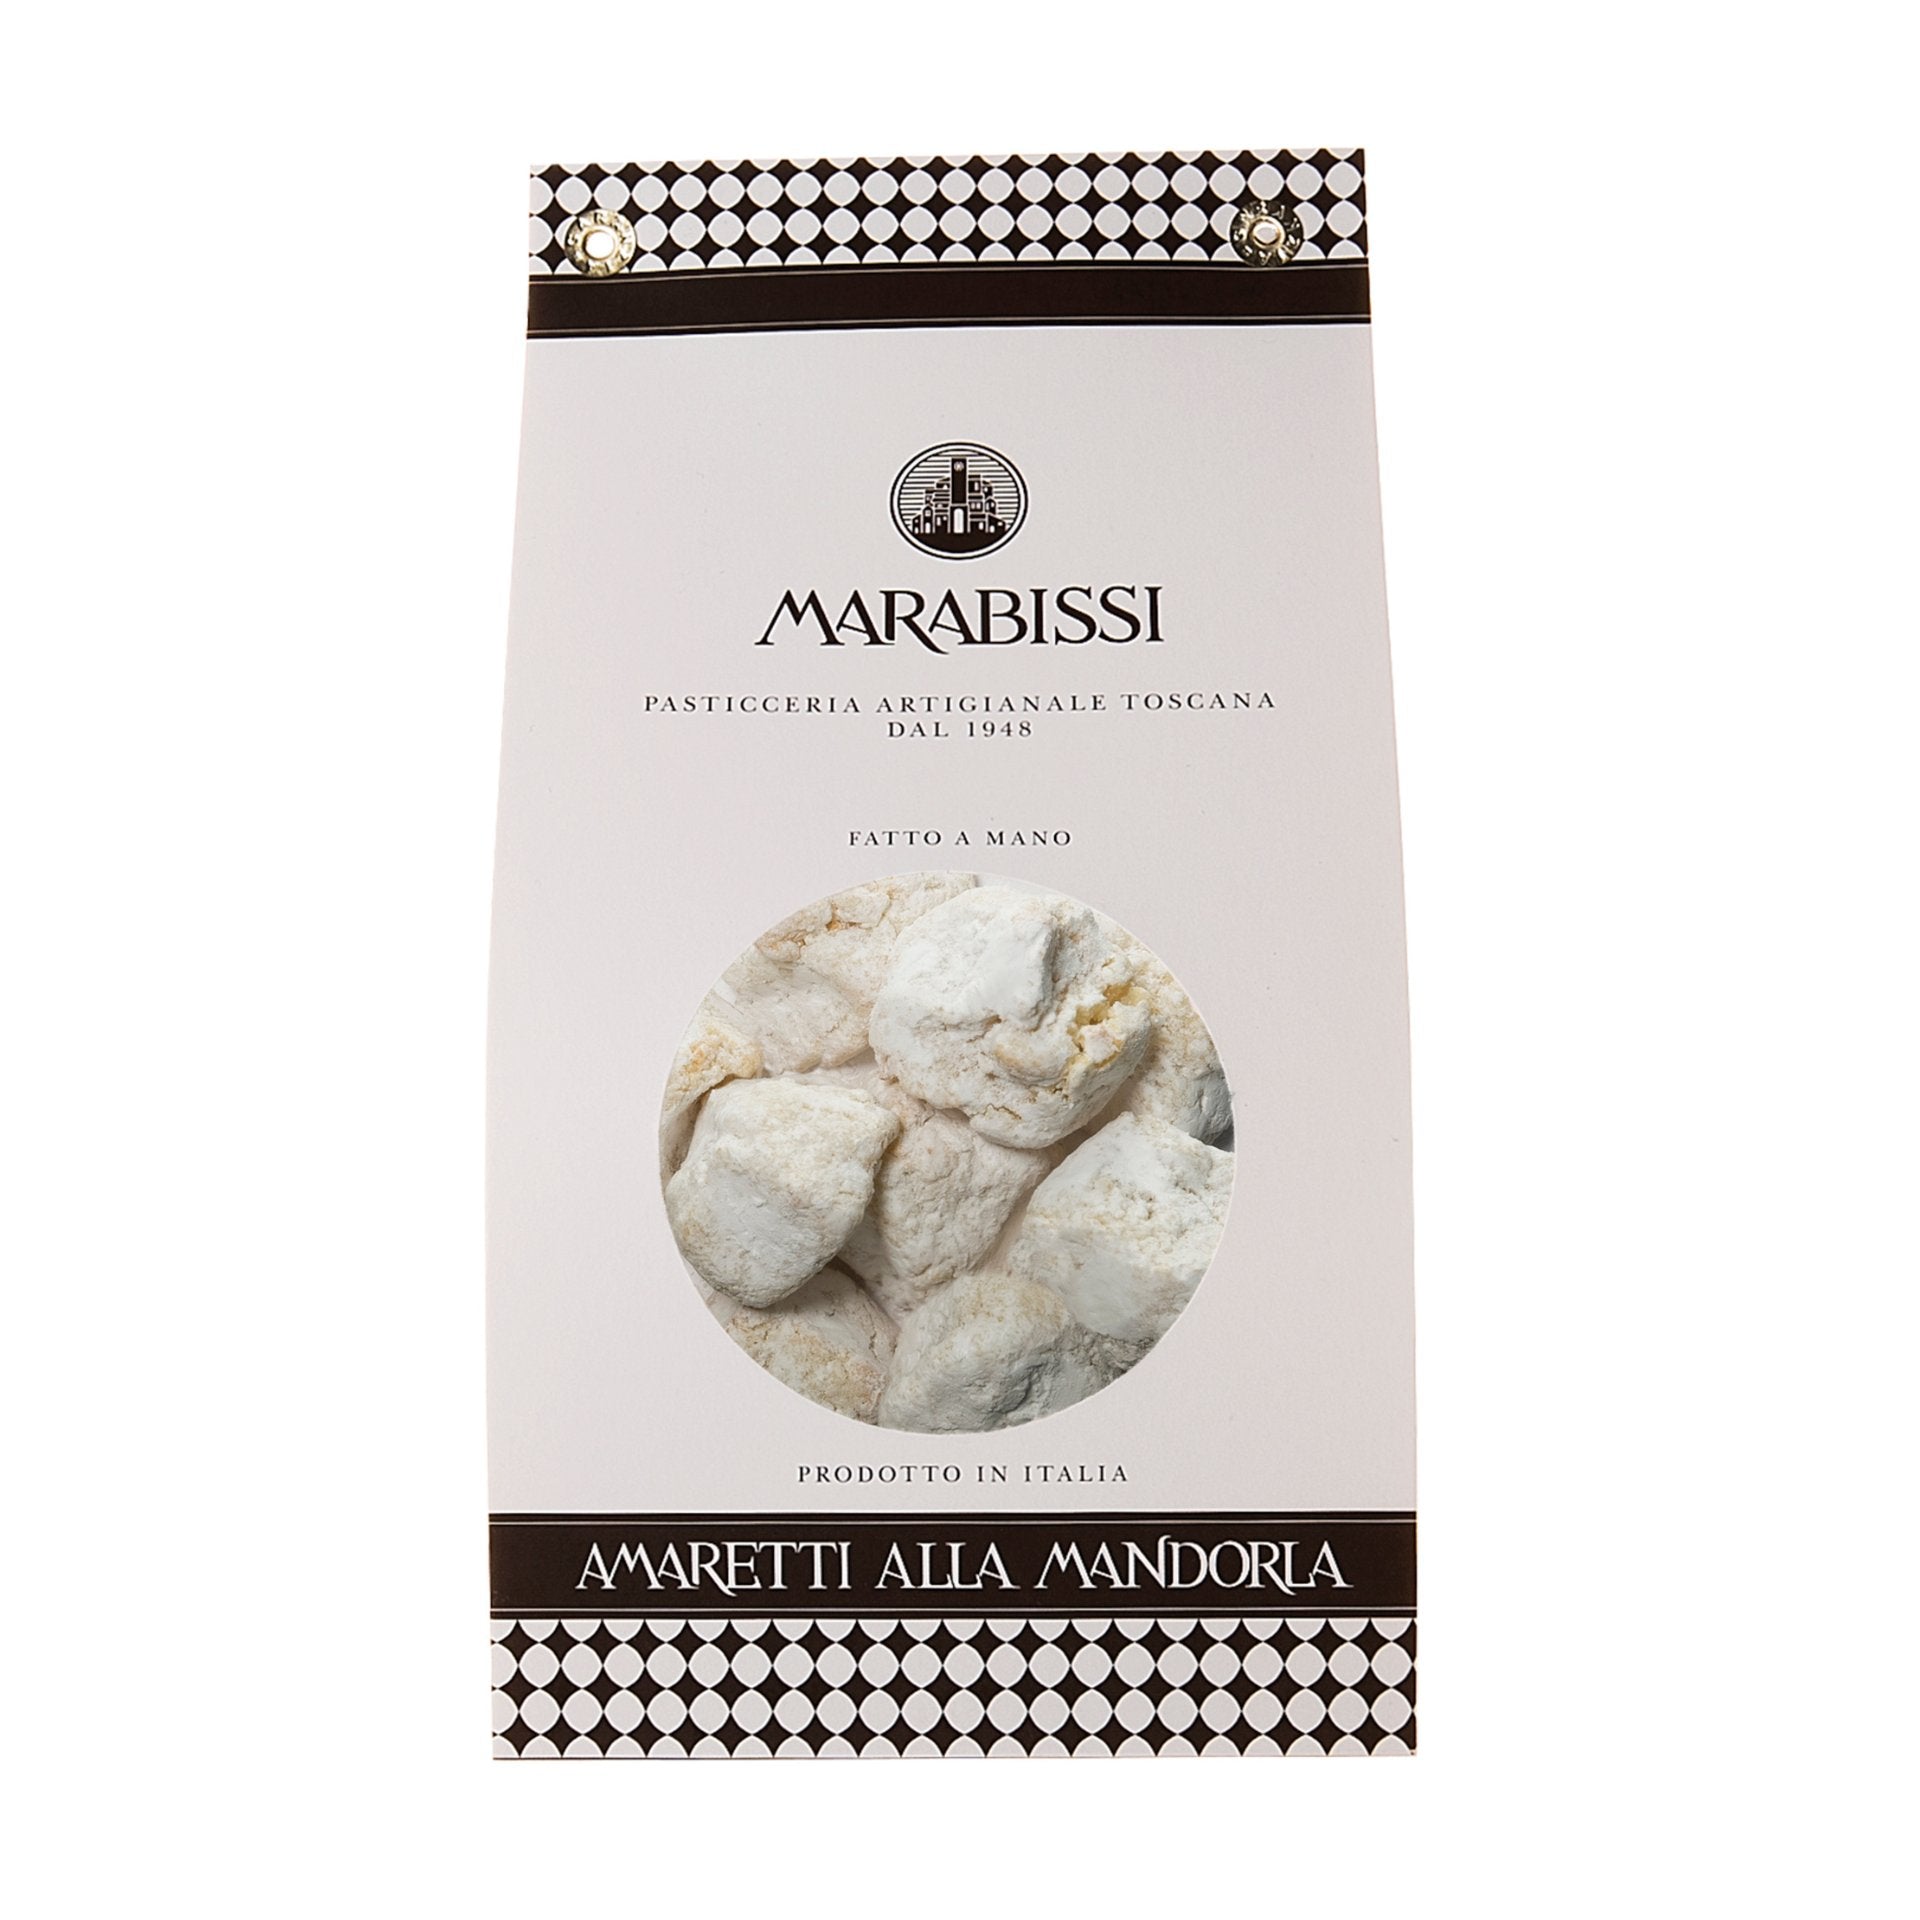 Marabissi Soft Almond Amaretti (White Bag) 180g  | Imported and distributed in the UK by Just Gourmet Foods